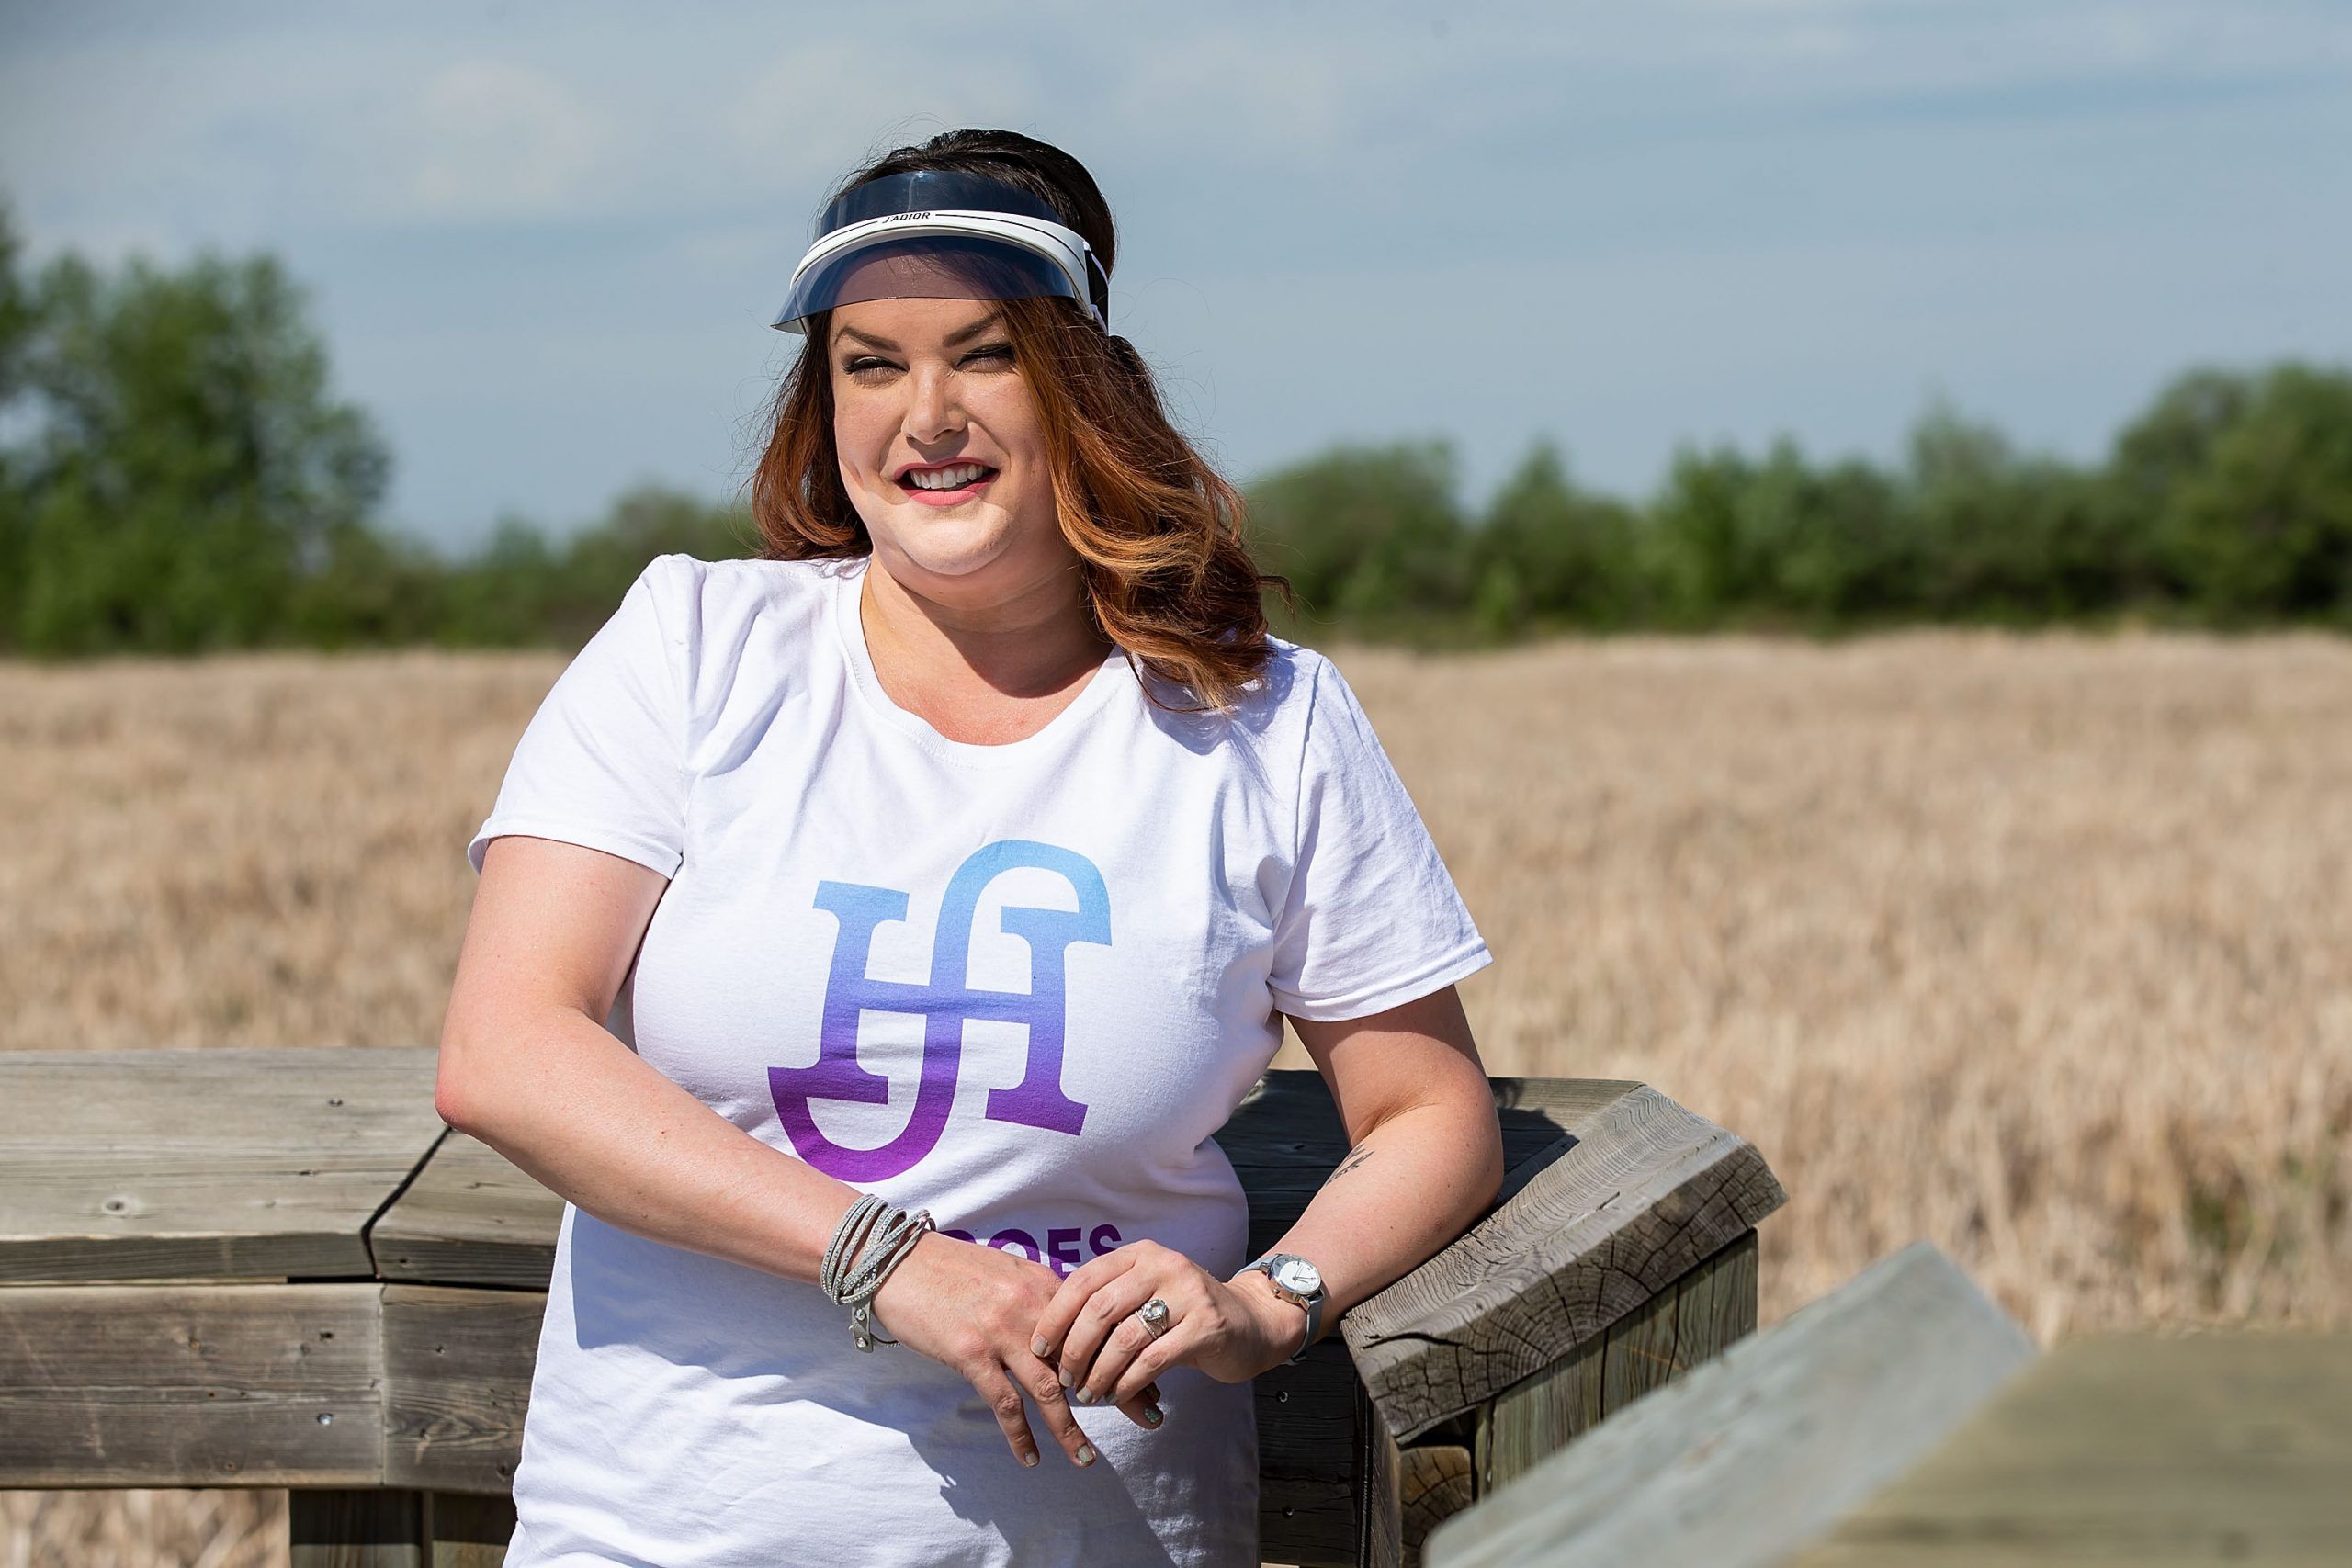 Krystle Sutherland is photographed in Lois Hole Centennial Provincial Park in St. Aalbert, Alta., on Friday, June 4, 2021. Sutherland, who has hidradenitis suppurativa (HS), created an HS patient support program in Edmonton. (Codie McLachlan/Postmedia)